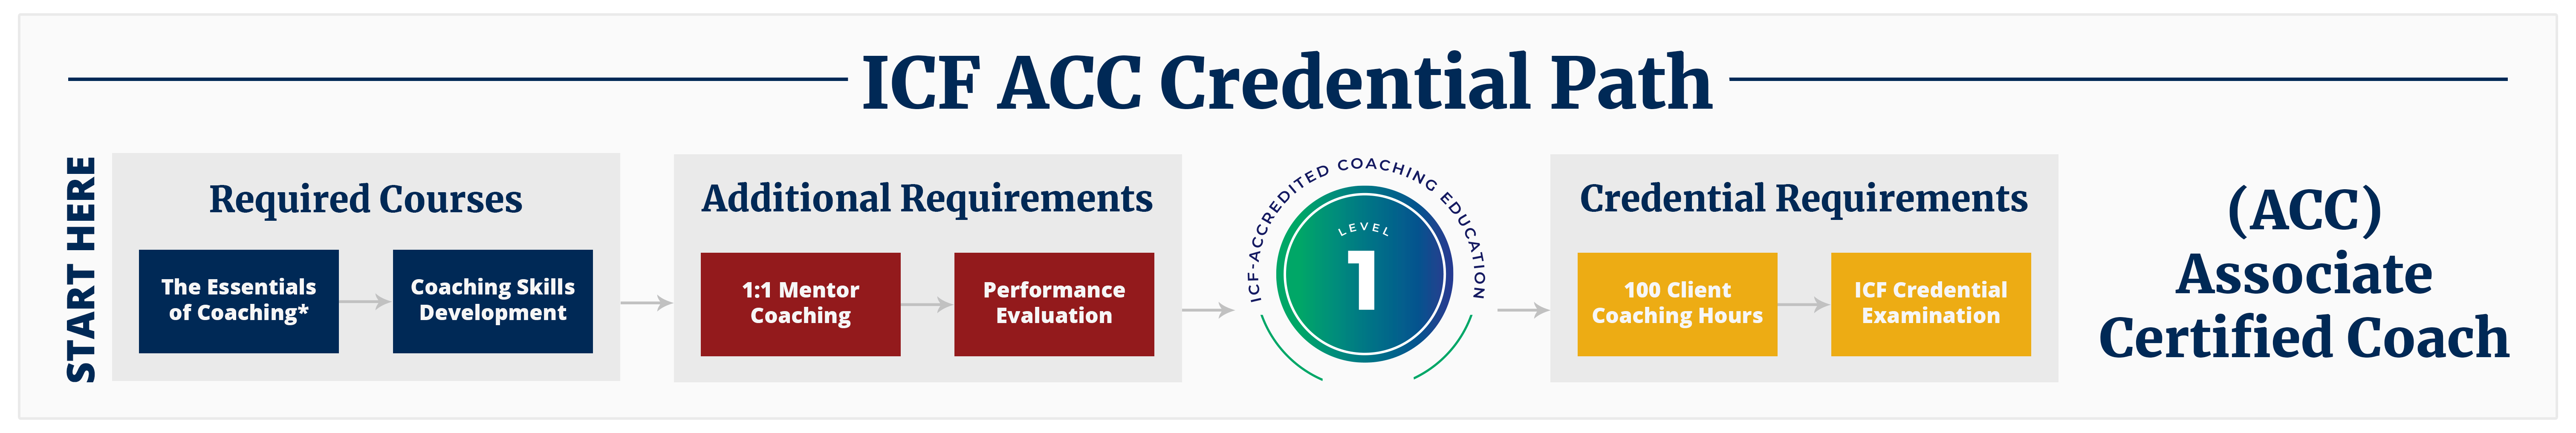 ICF ACC Credential Path